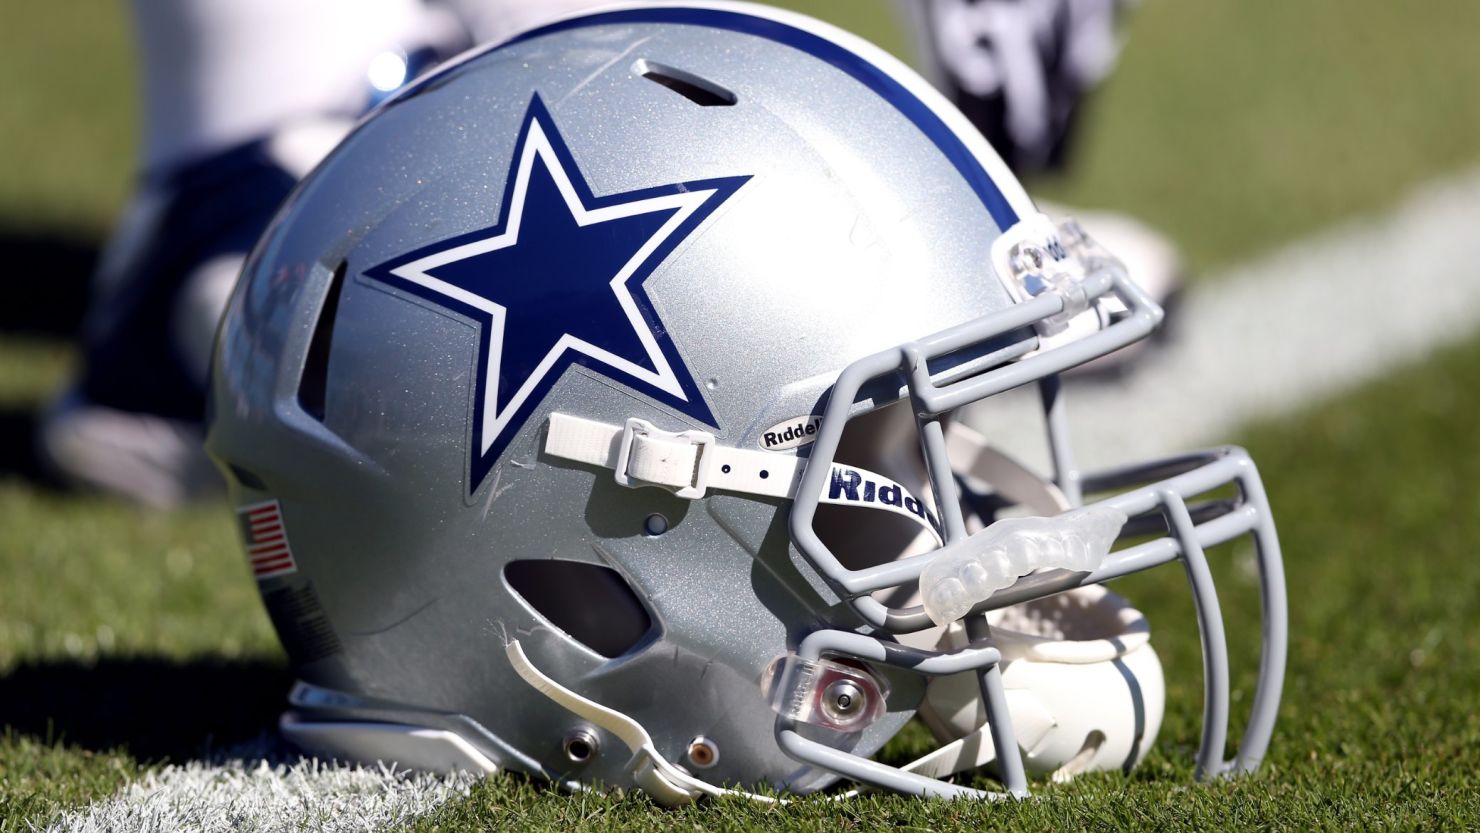 Jack Eskridge designed the Dallas Cowboys' team logo after joining the team in 1959.